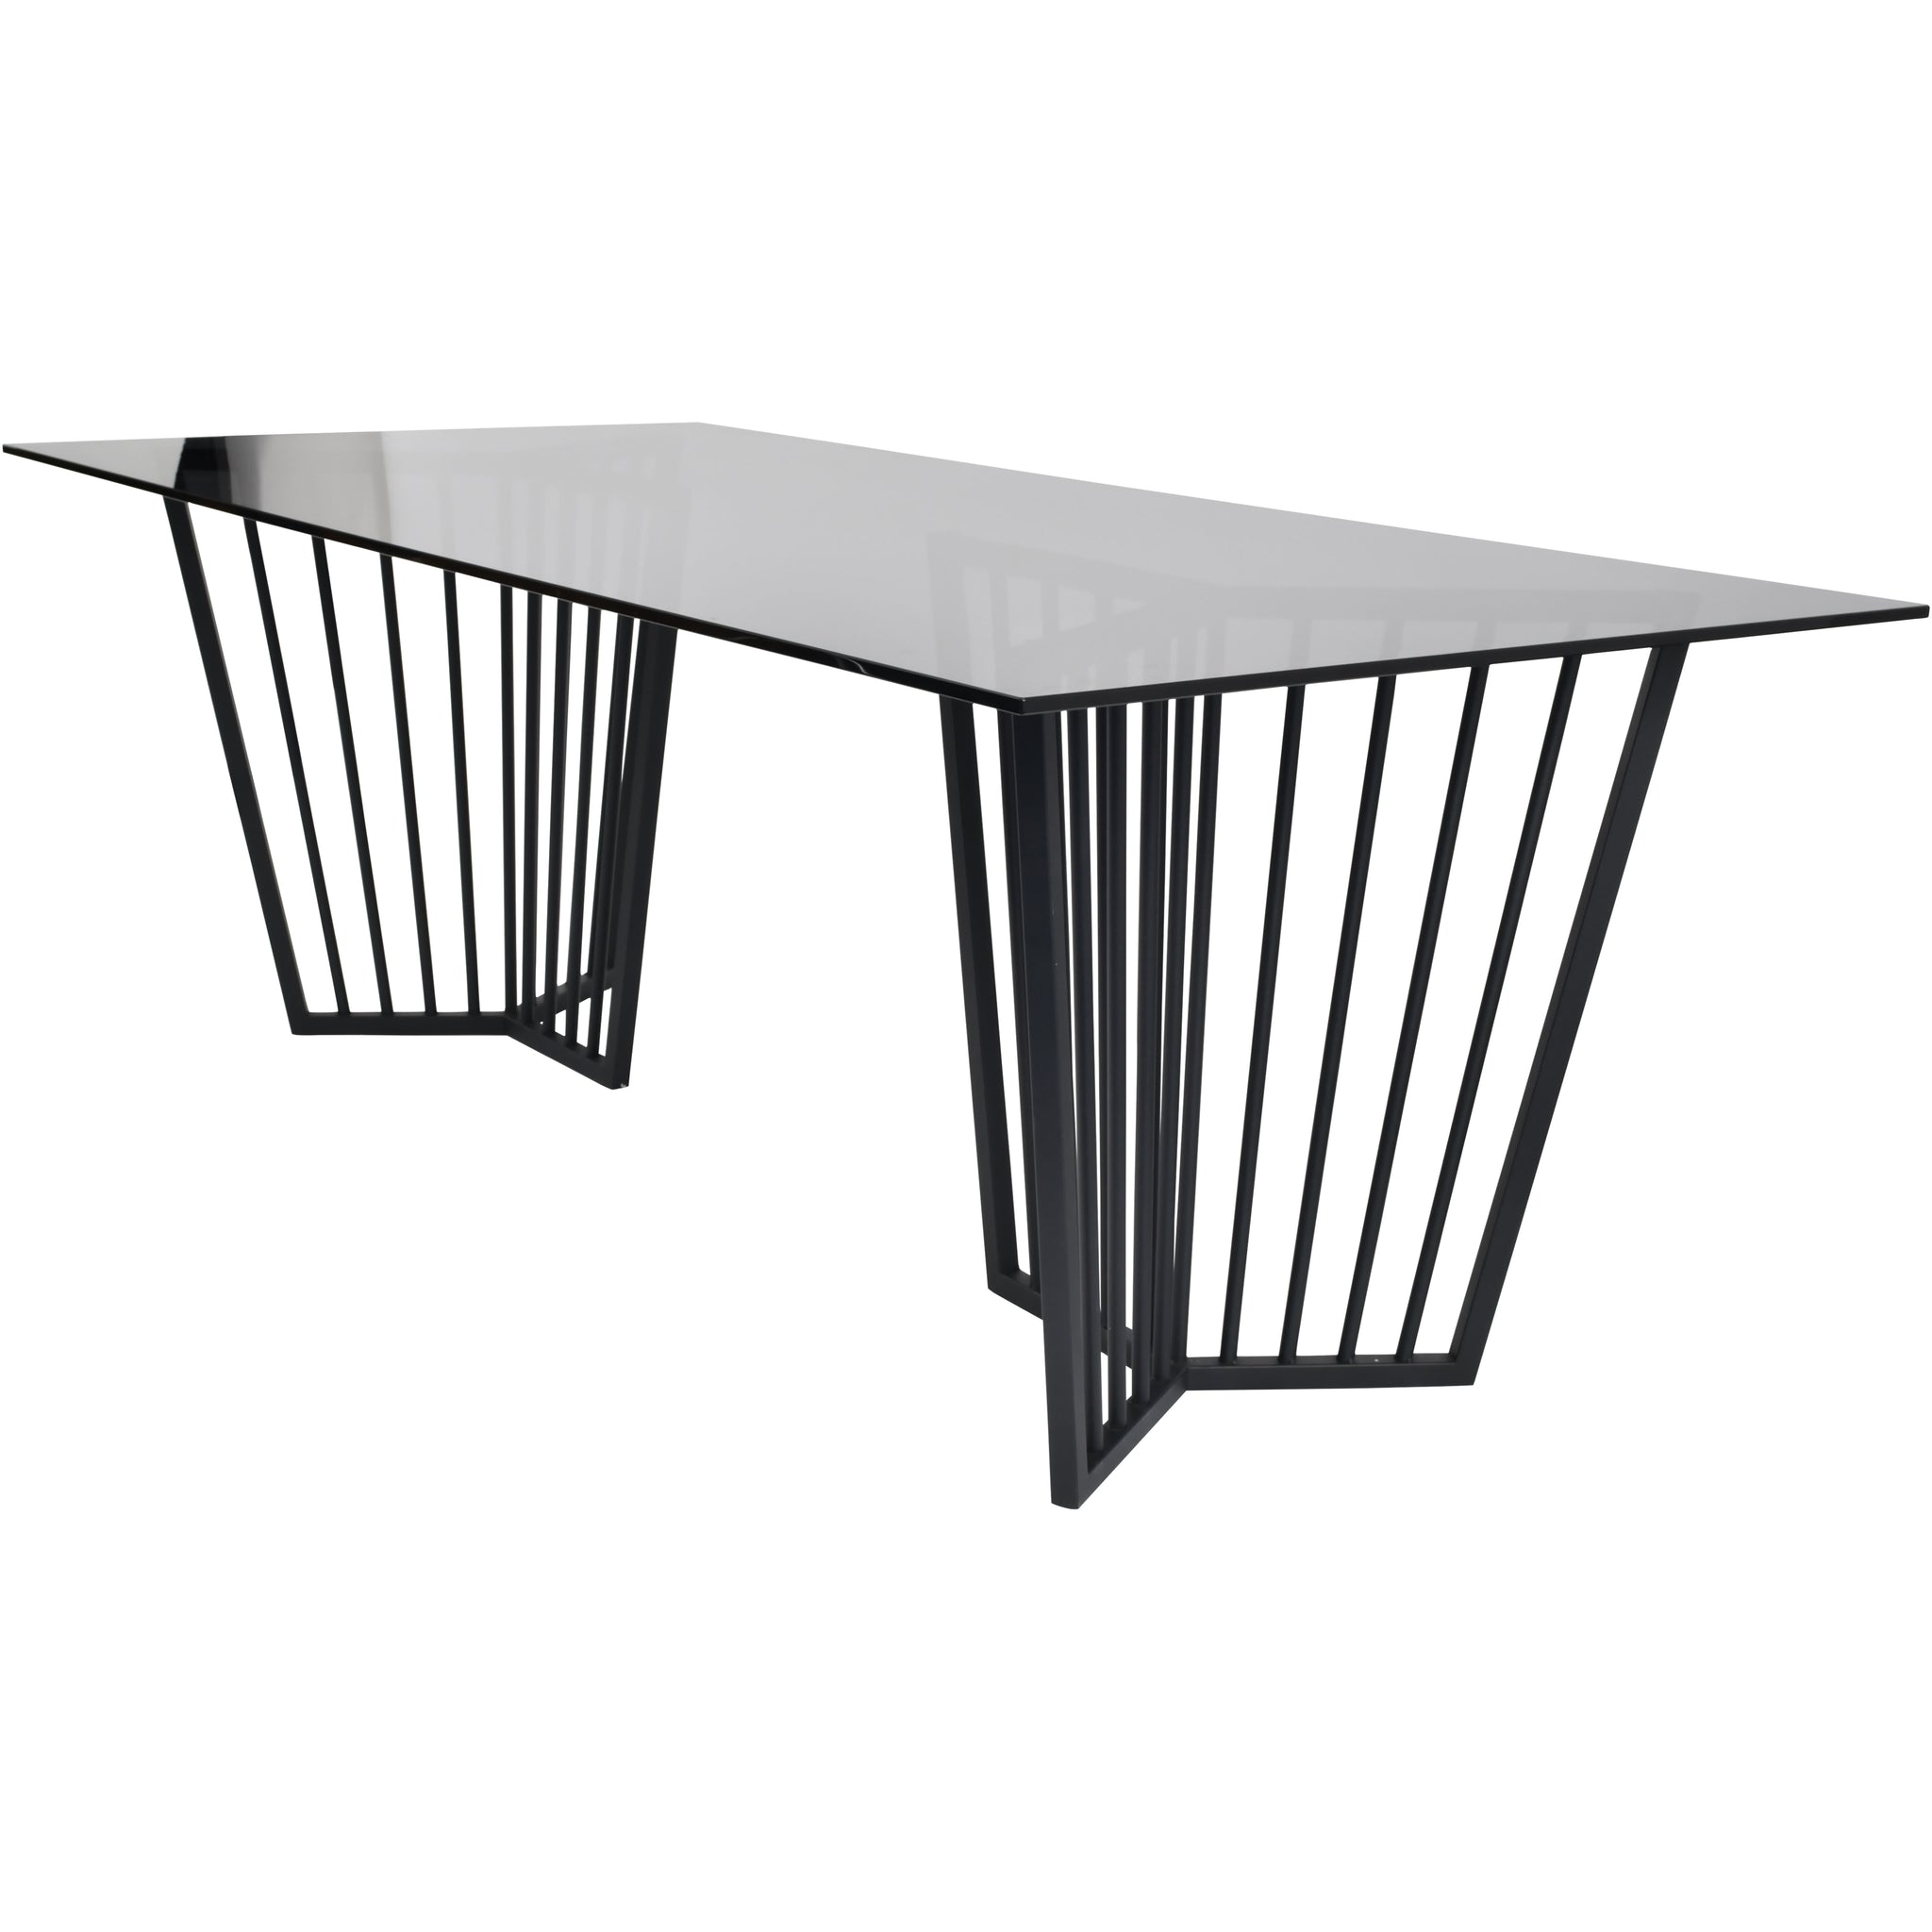 Alberta Black Frame and Tinted Glass Dining Table 200cm